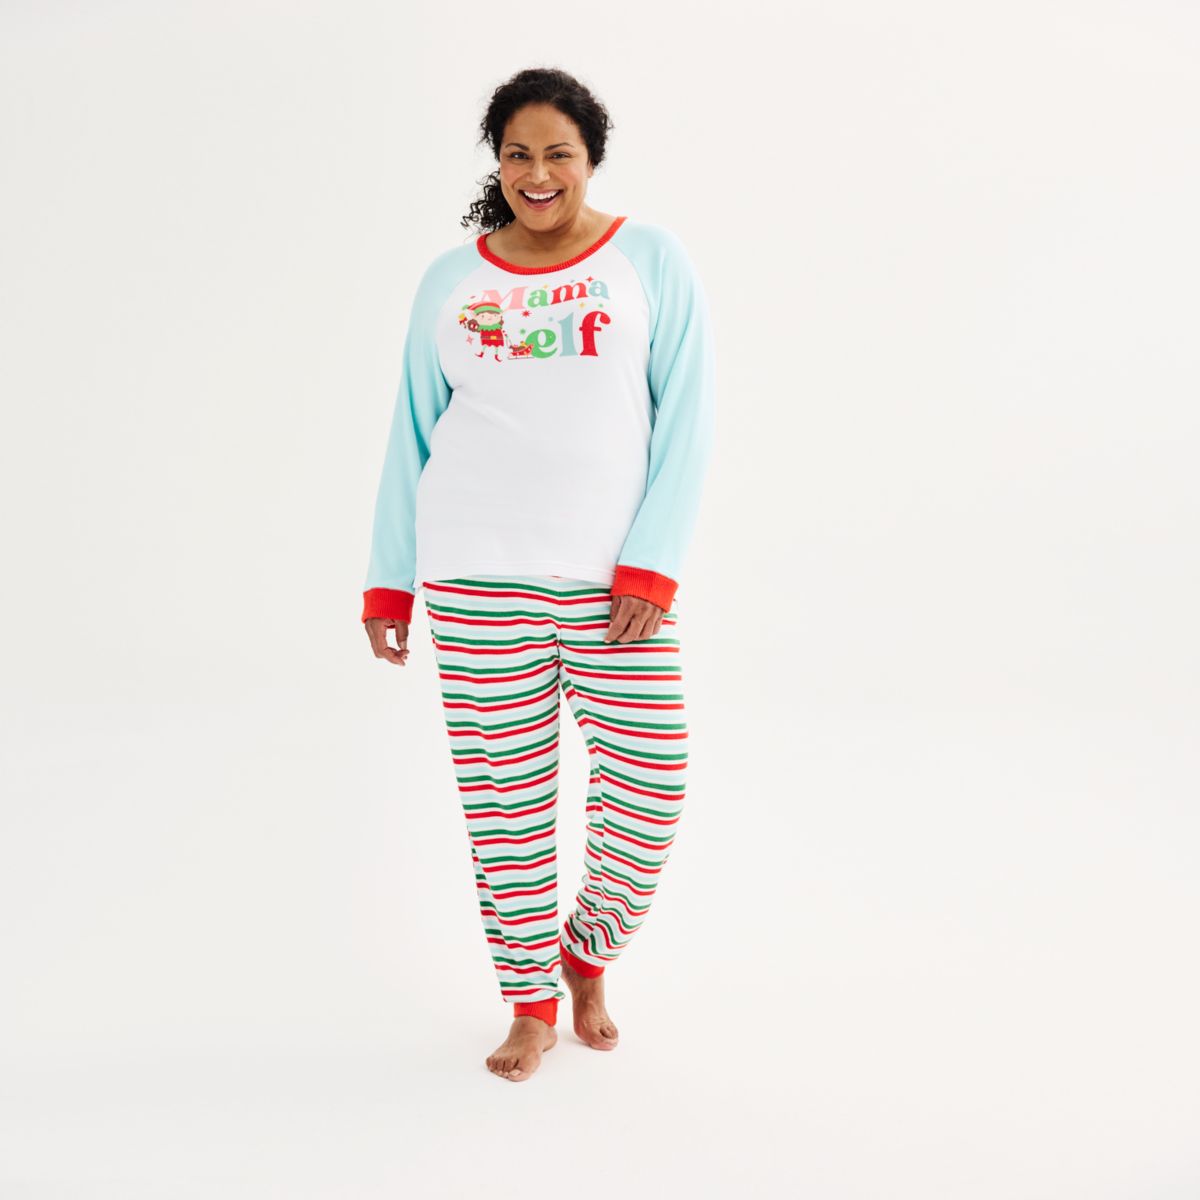 Plus Size Jammies For Your Families® Sweater Knit Mama Elf Top & Bottoms Pajama Set by Cuddl Duds® Cuddl Duds